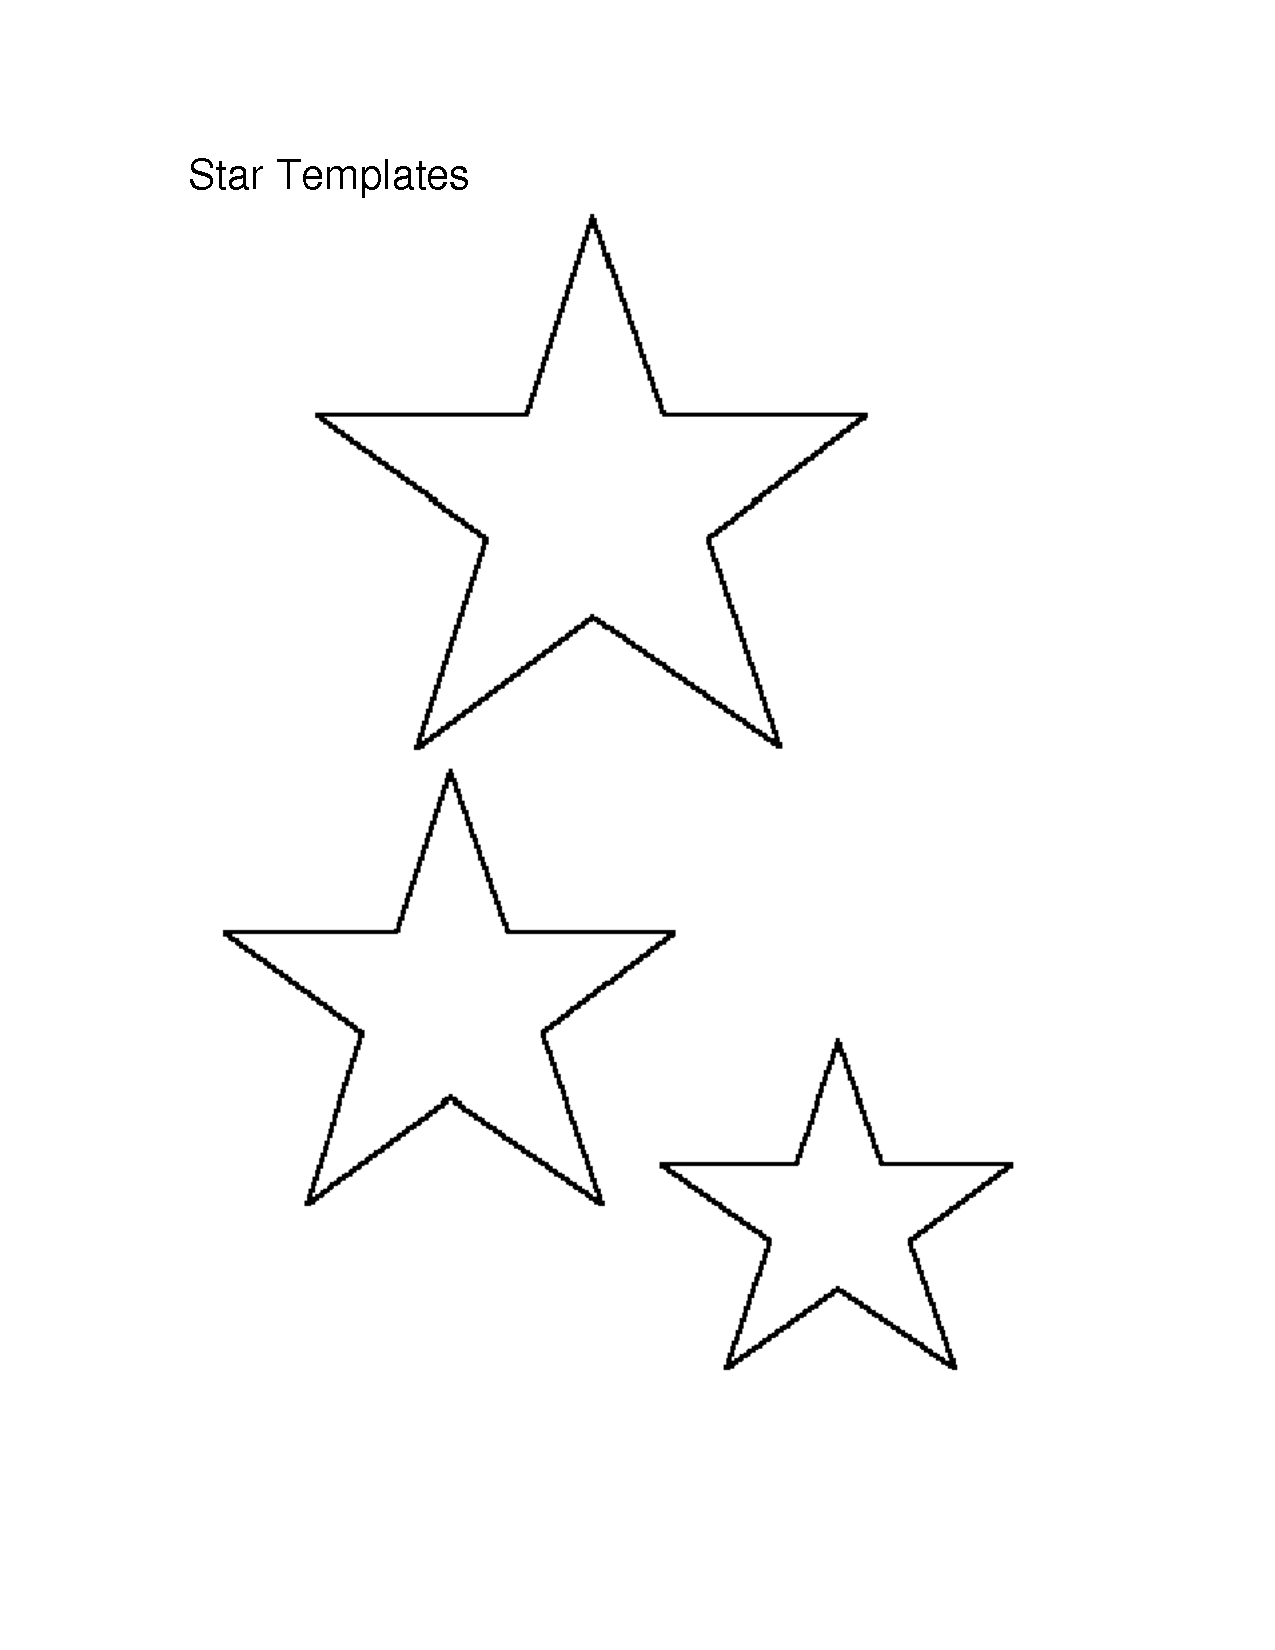 6 Best Images of Small Star Stencils Free Printable Large Star